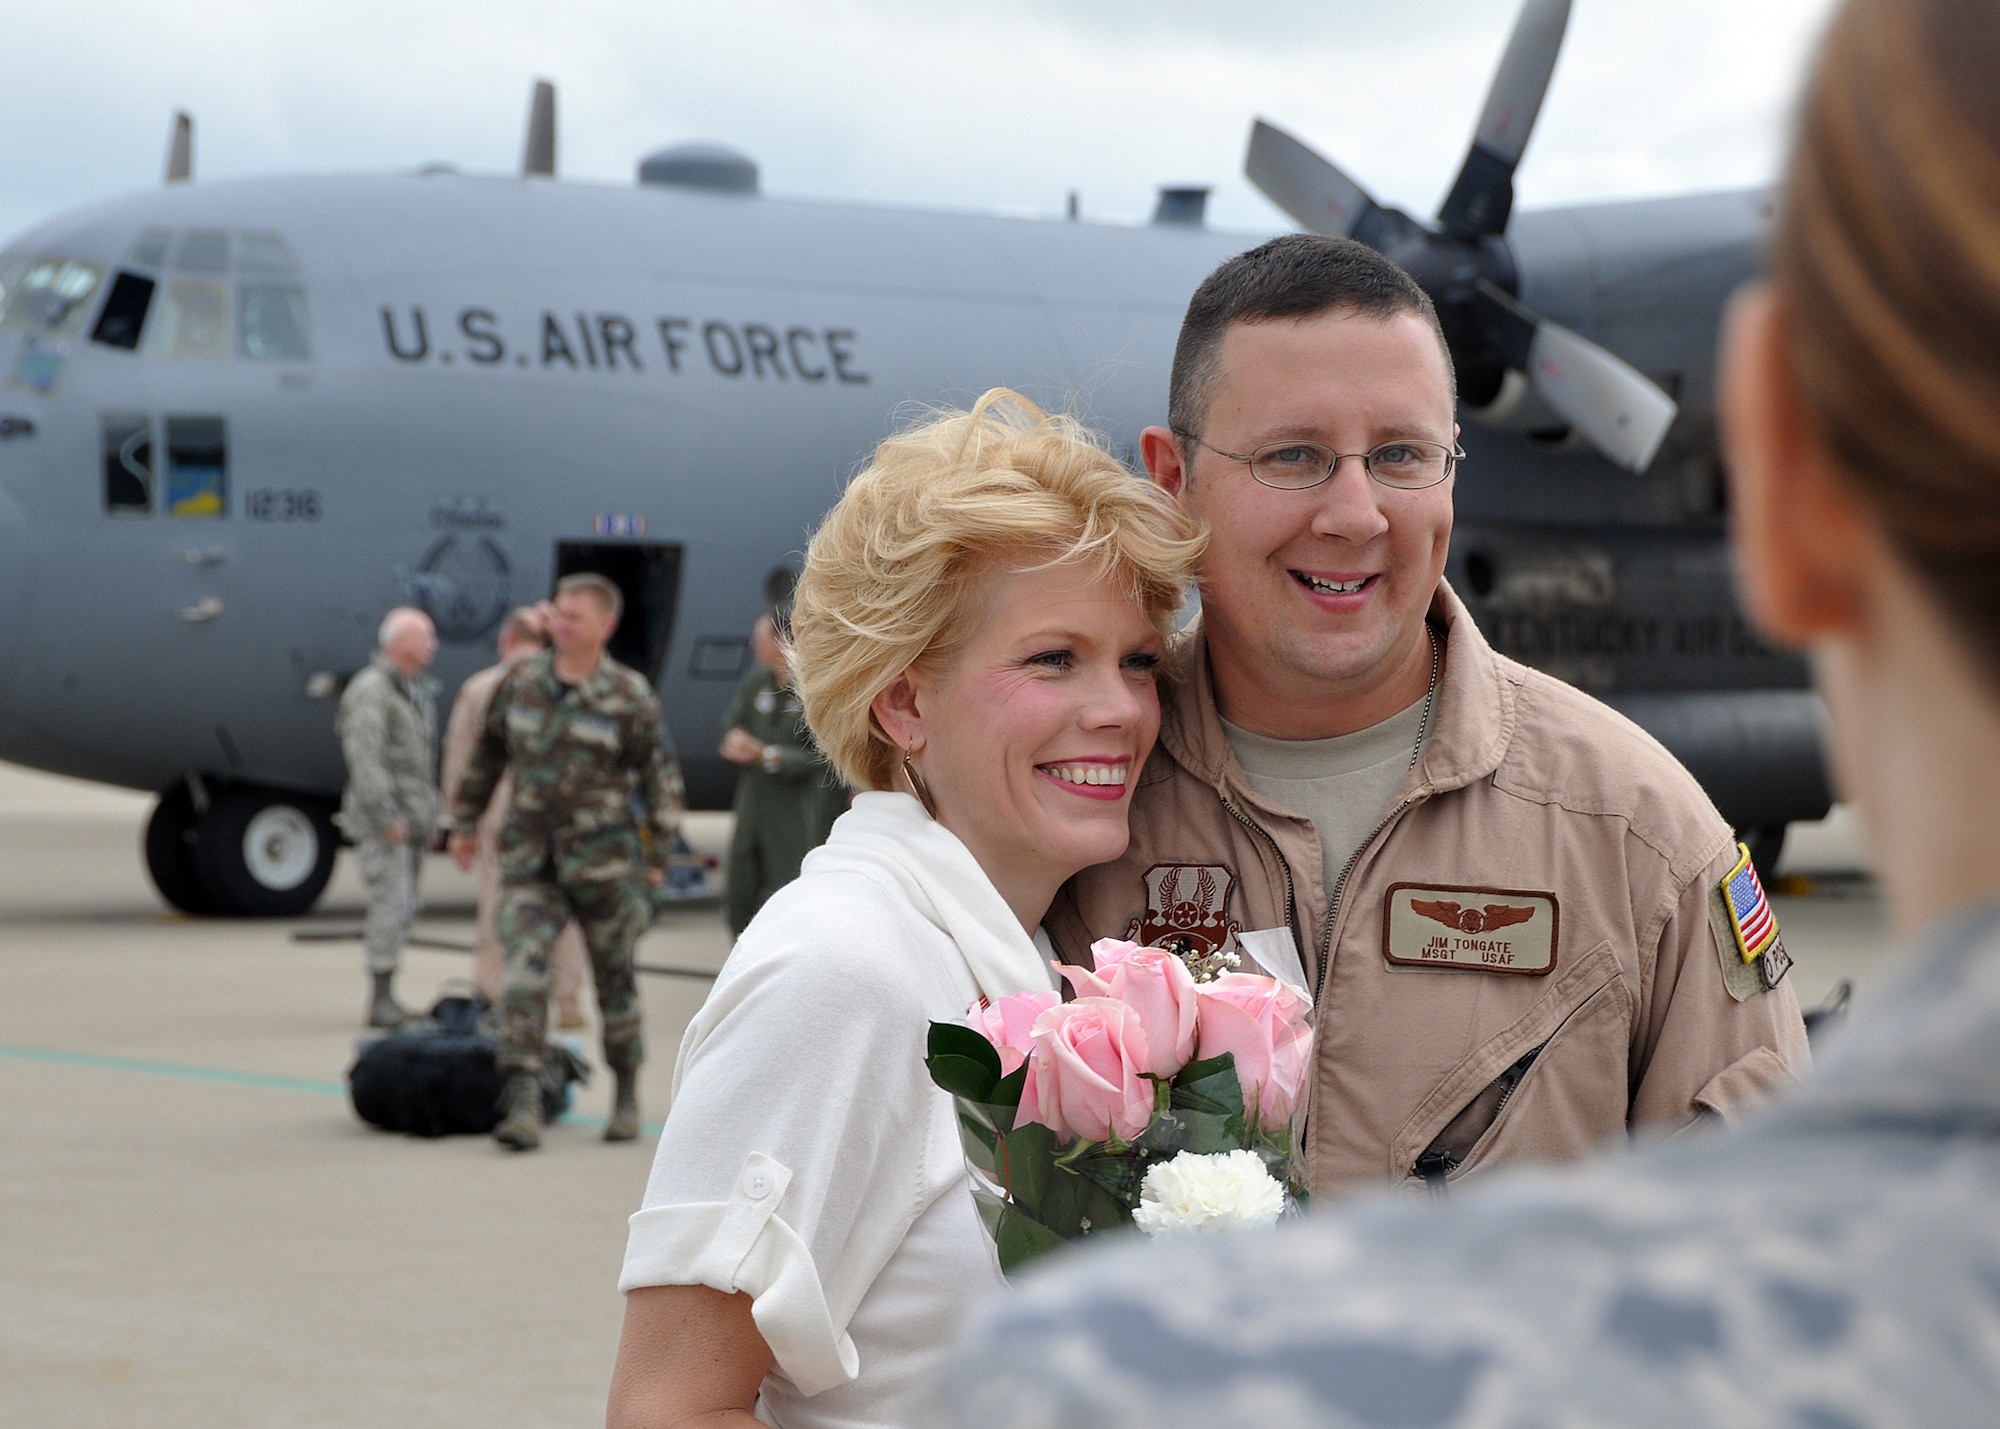 Master Sgt. Jim Tongate of the Kentucky Air National Guard poses for a photo with his wife on May 14. Sergeant Tongate and many other Airmen were returning from a Air Expeditionary Force deployment to Afghanistan. (U.S. Air Force photo / Airman 1st Class Maxwell Rechel.)